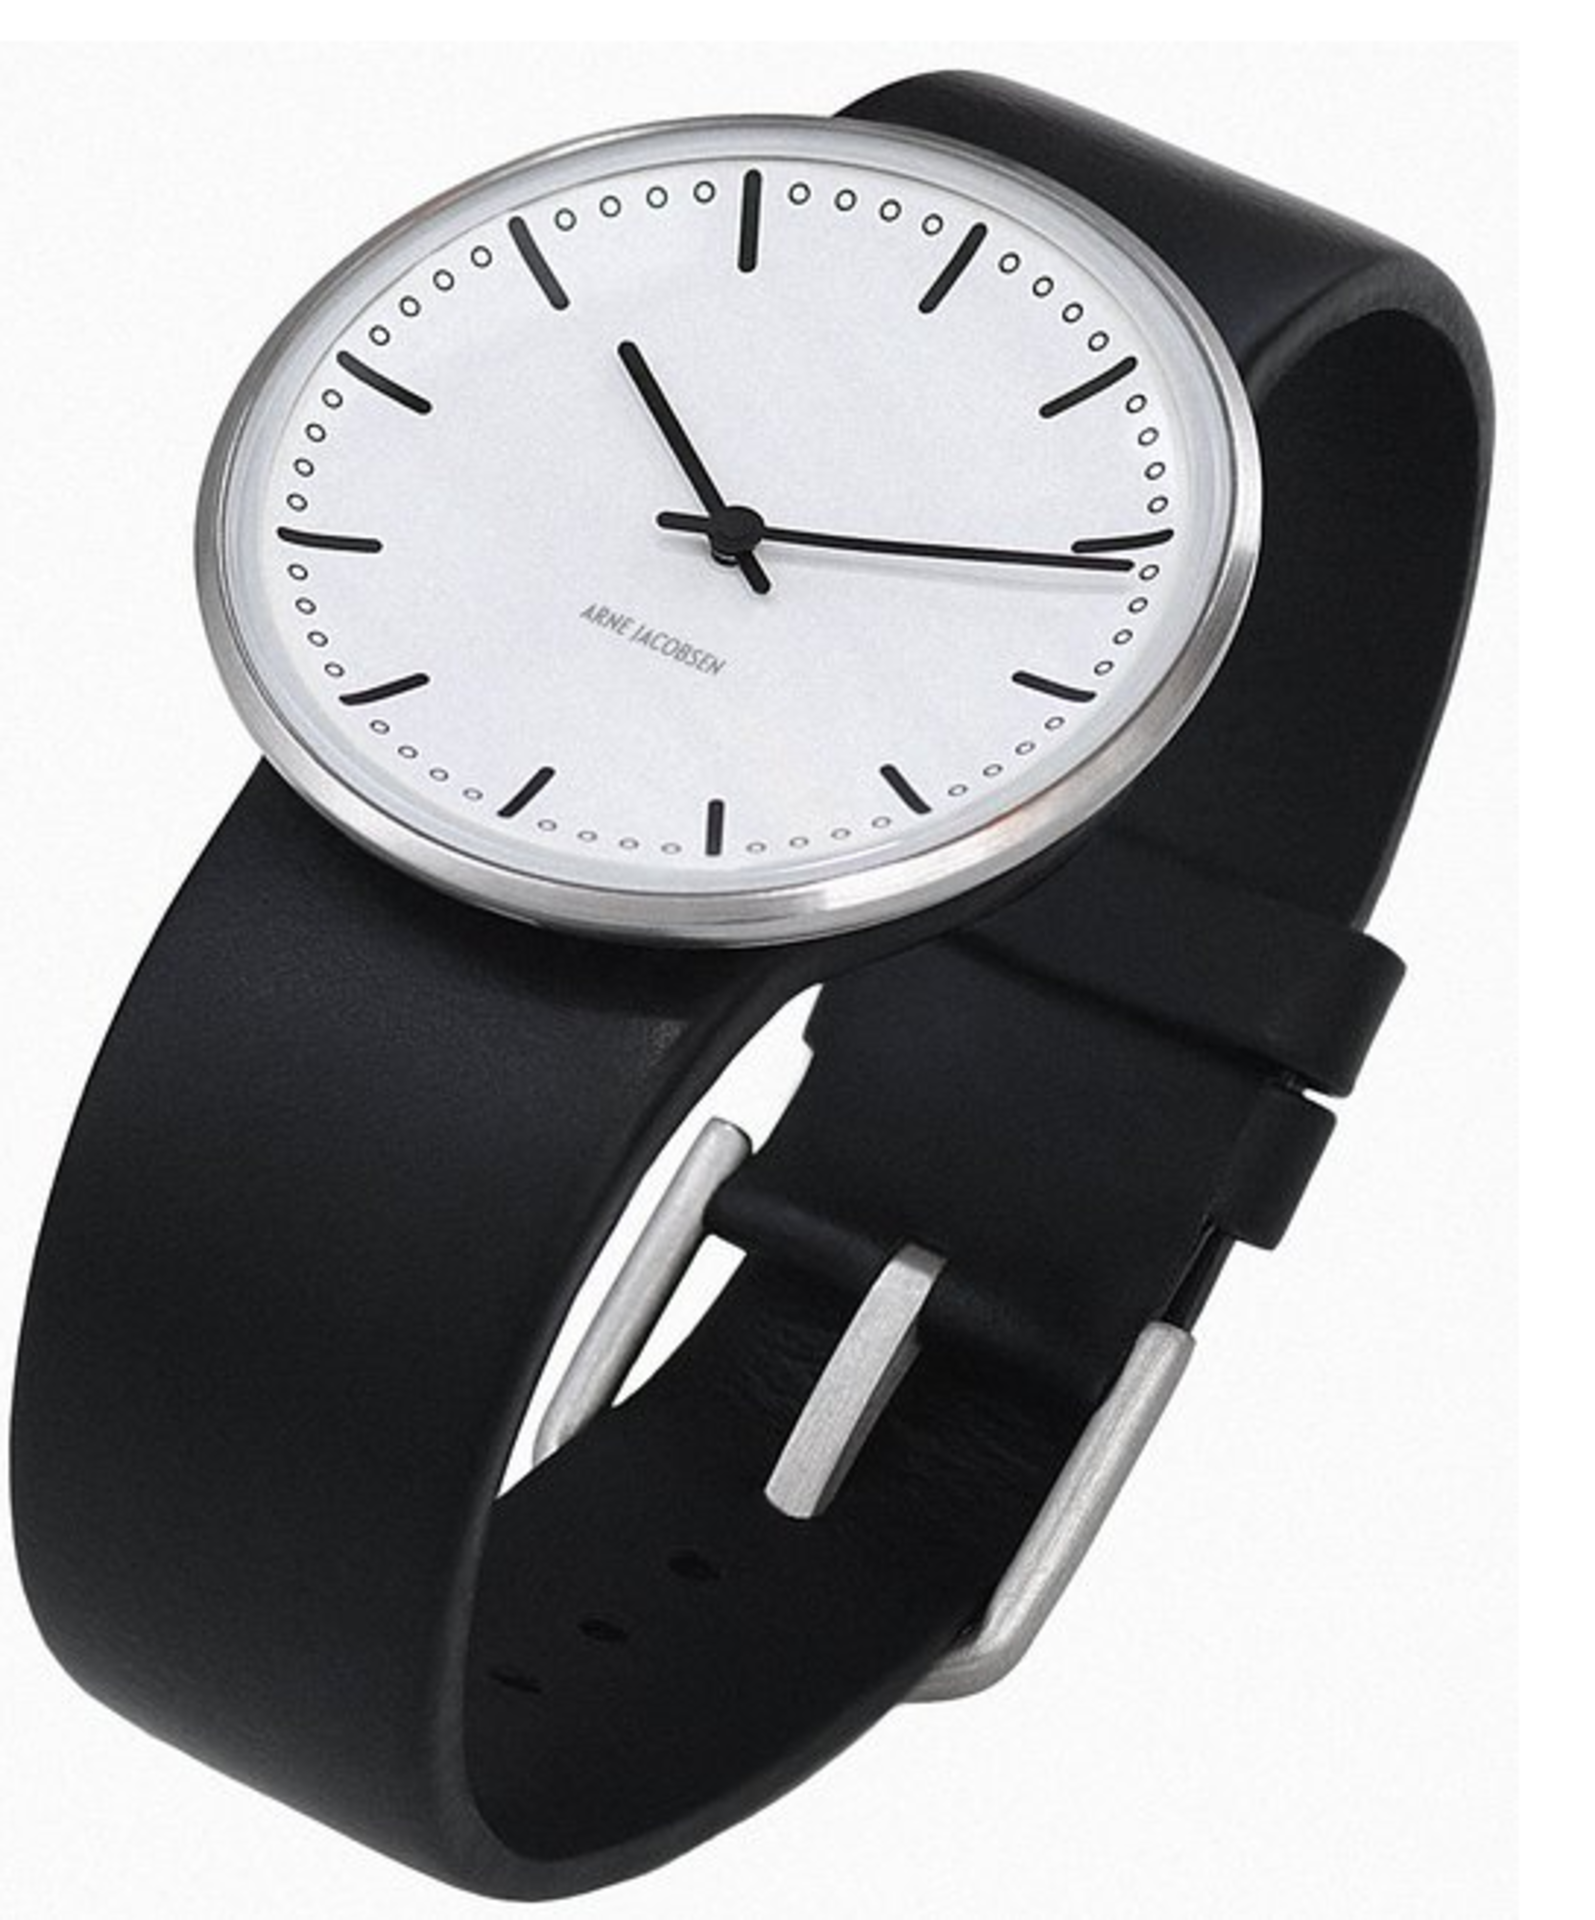 Arne Jacobsen City Hall Unisex Watch 43457 with Black Dial and Black Calf Skin Strap (Large)